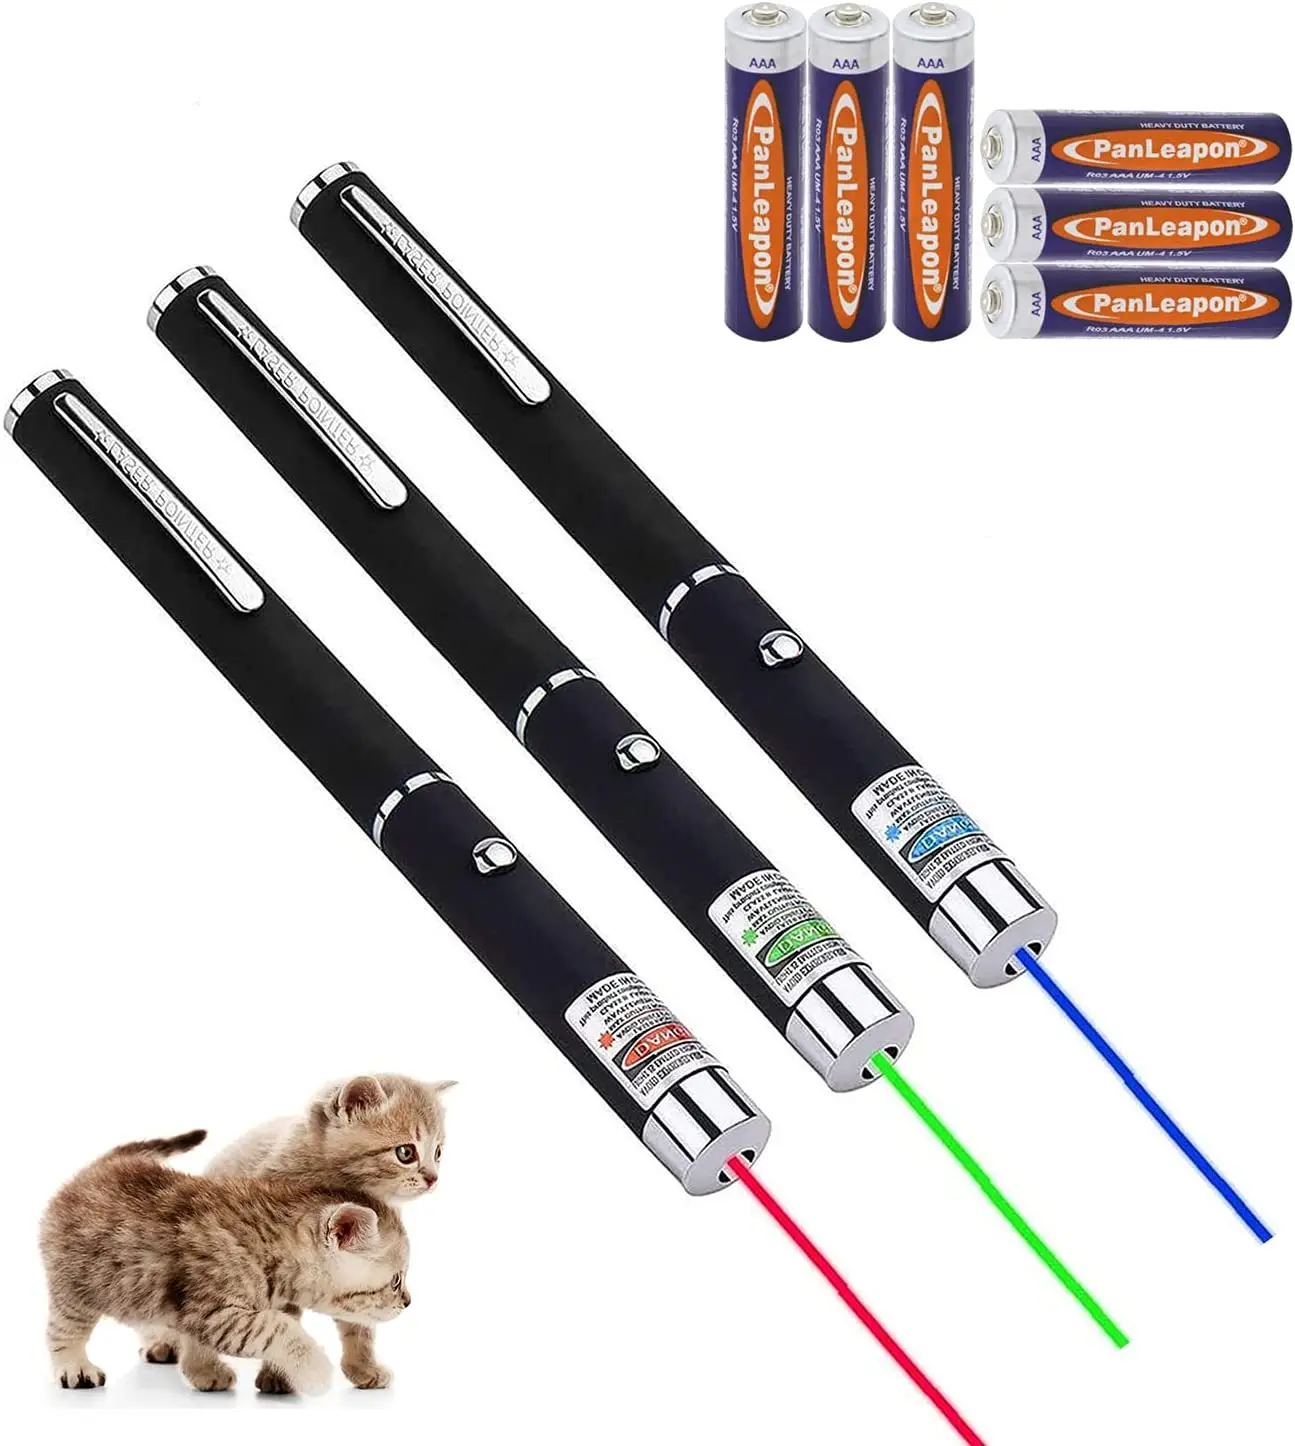 

Laser Pointer, Cat Toys for Indoor Kitten, Lazer Pointer Pen with Red Light, Interactive Pet Cat Toy(3 Packs), Blue red purple